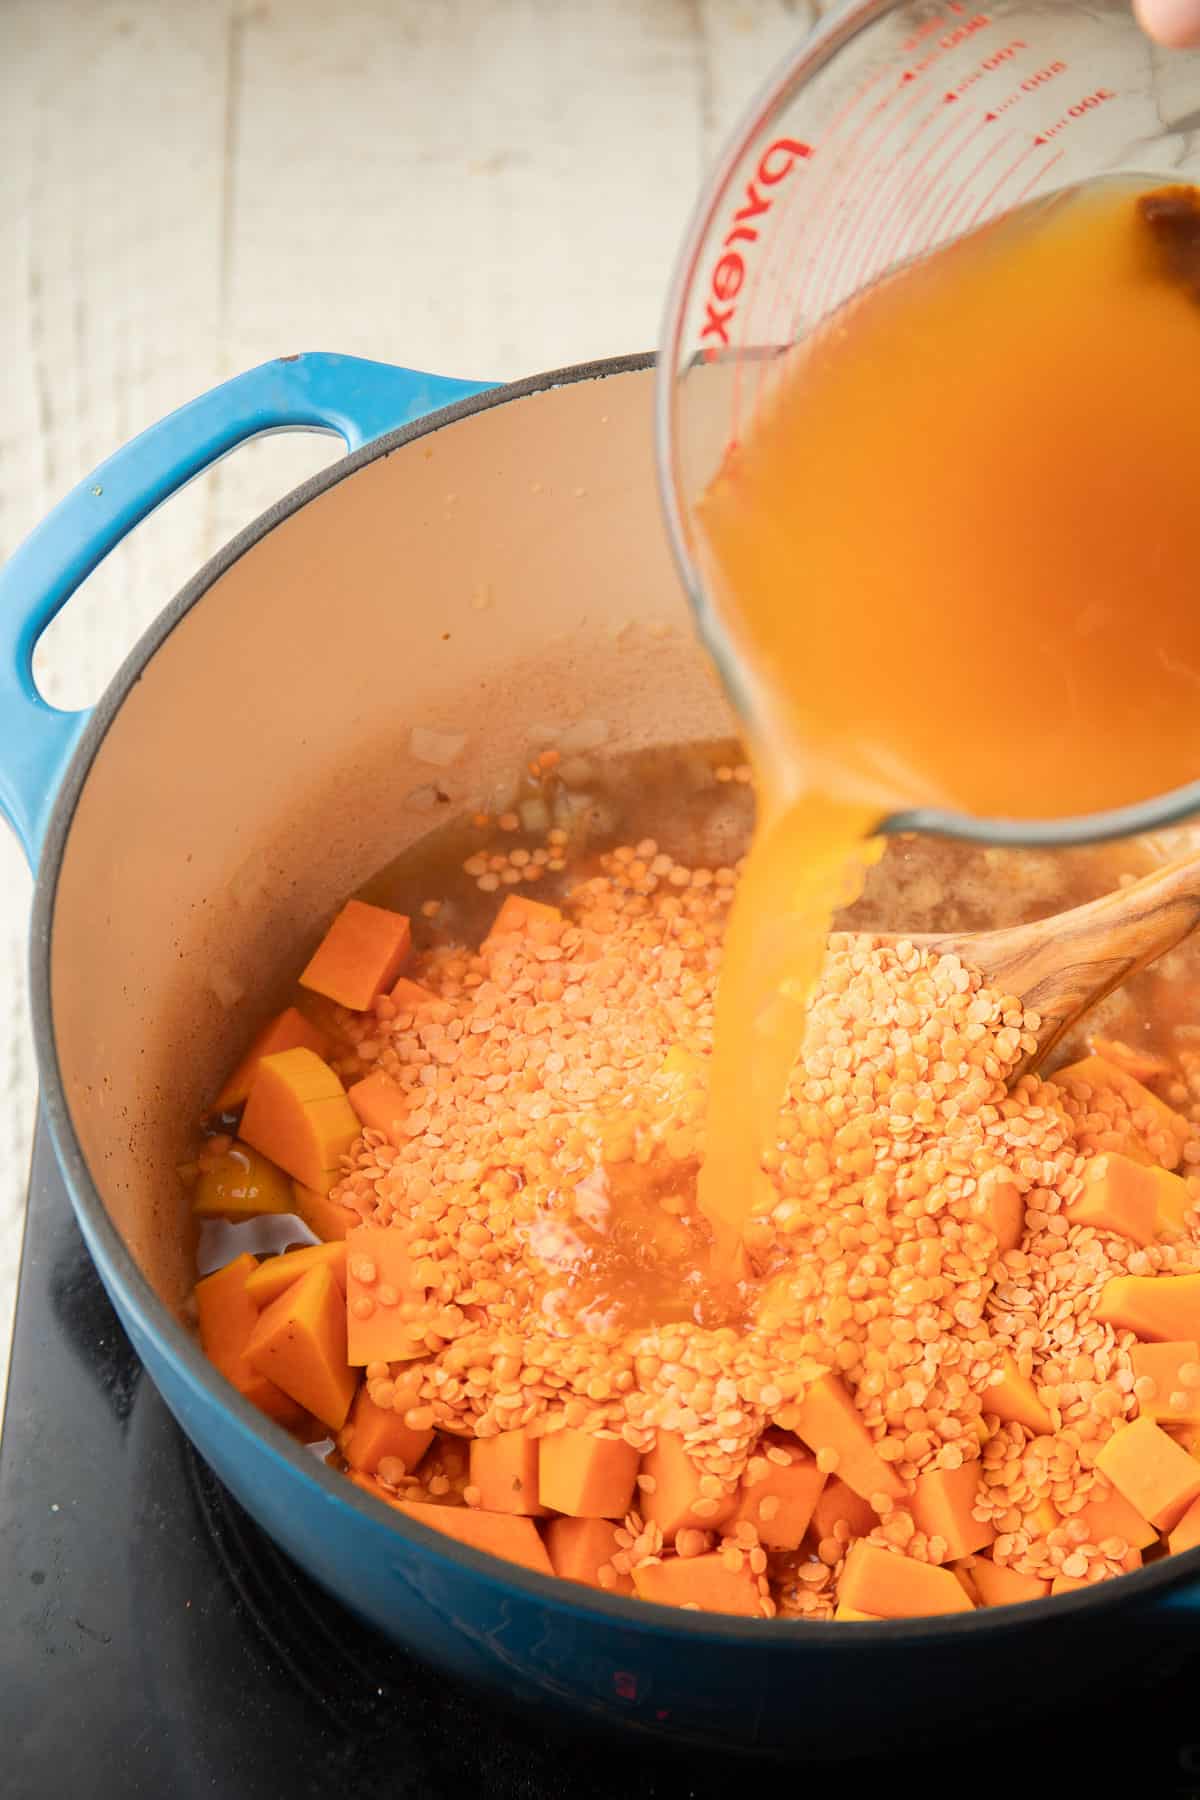 Broth being poured into a pot filled with red lentils and butternut squash.